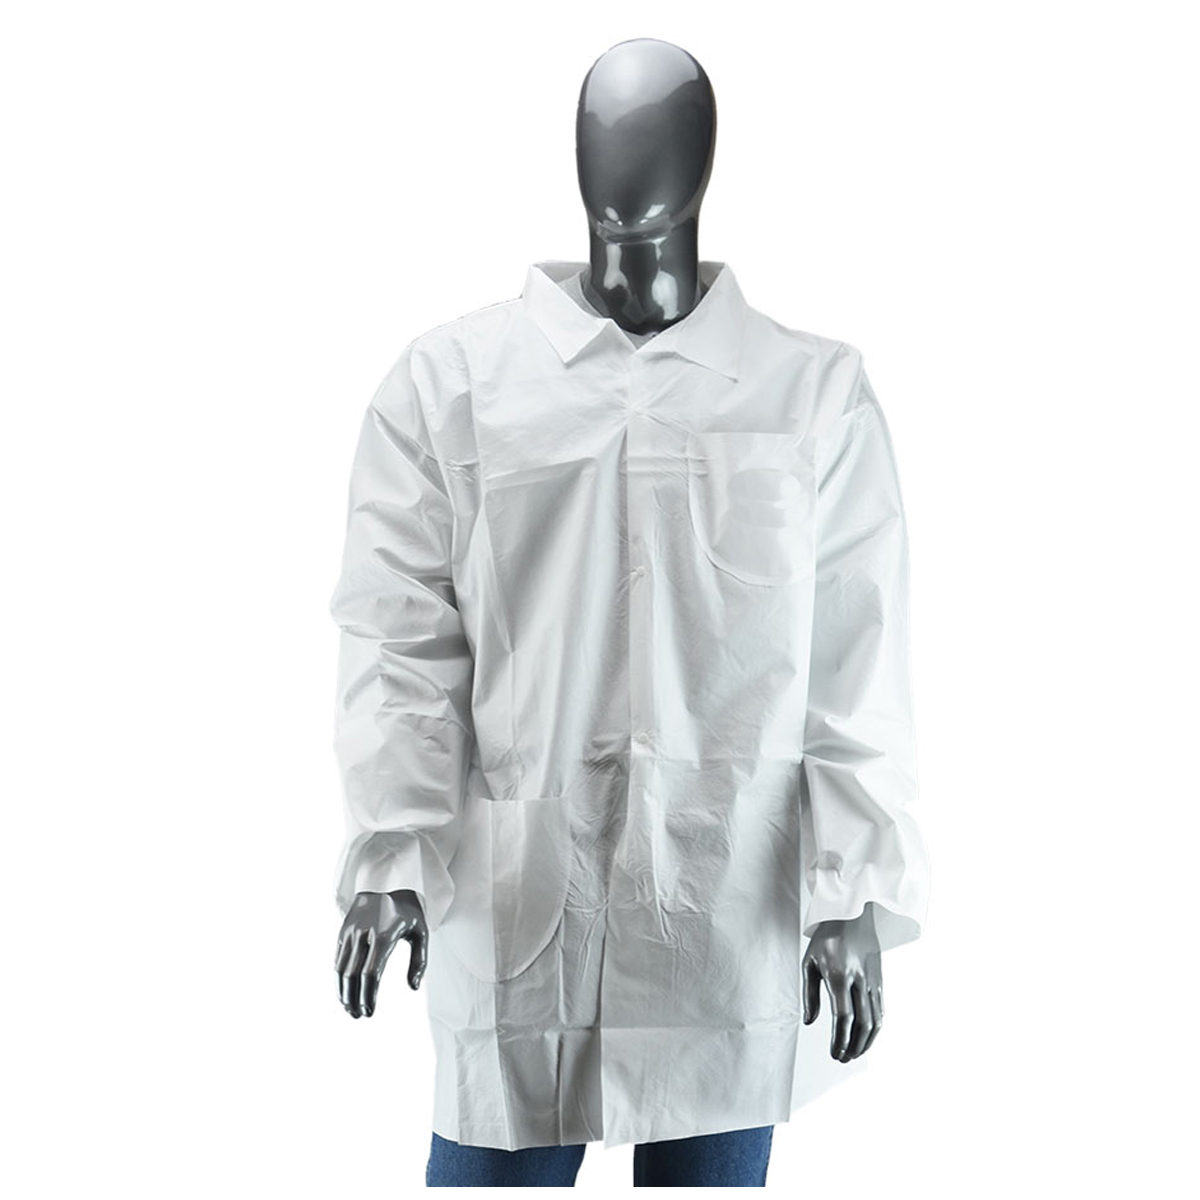 RADNOR® 3X White Polypropylene Disposable Lab Coat (Availability restrictions apply.)